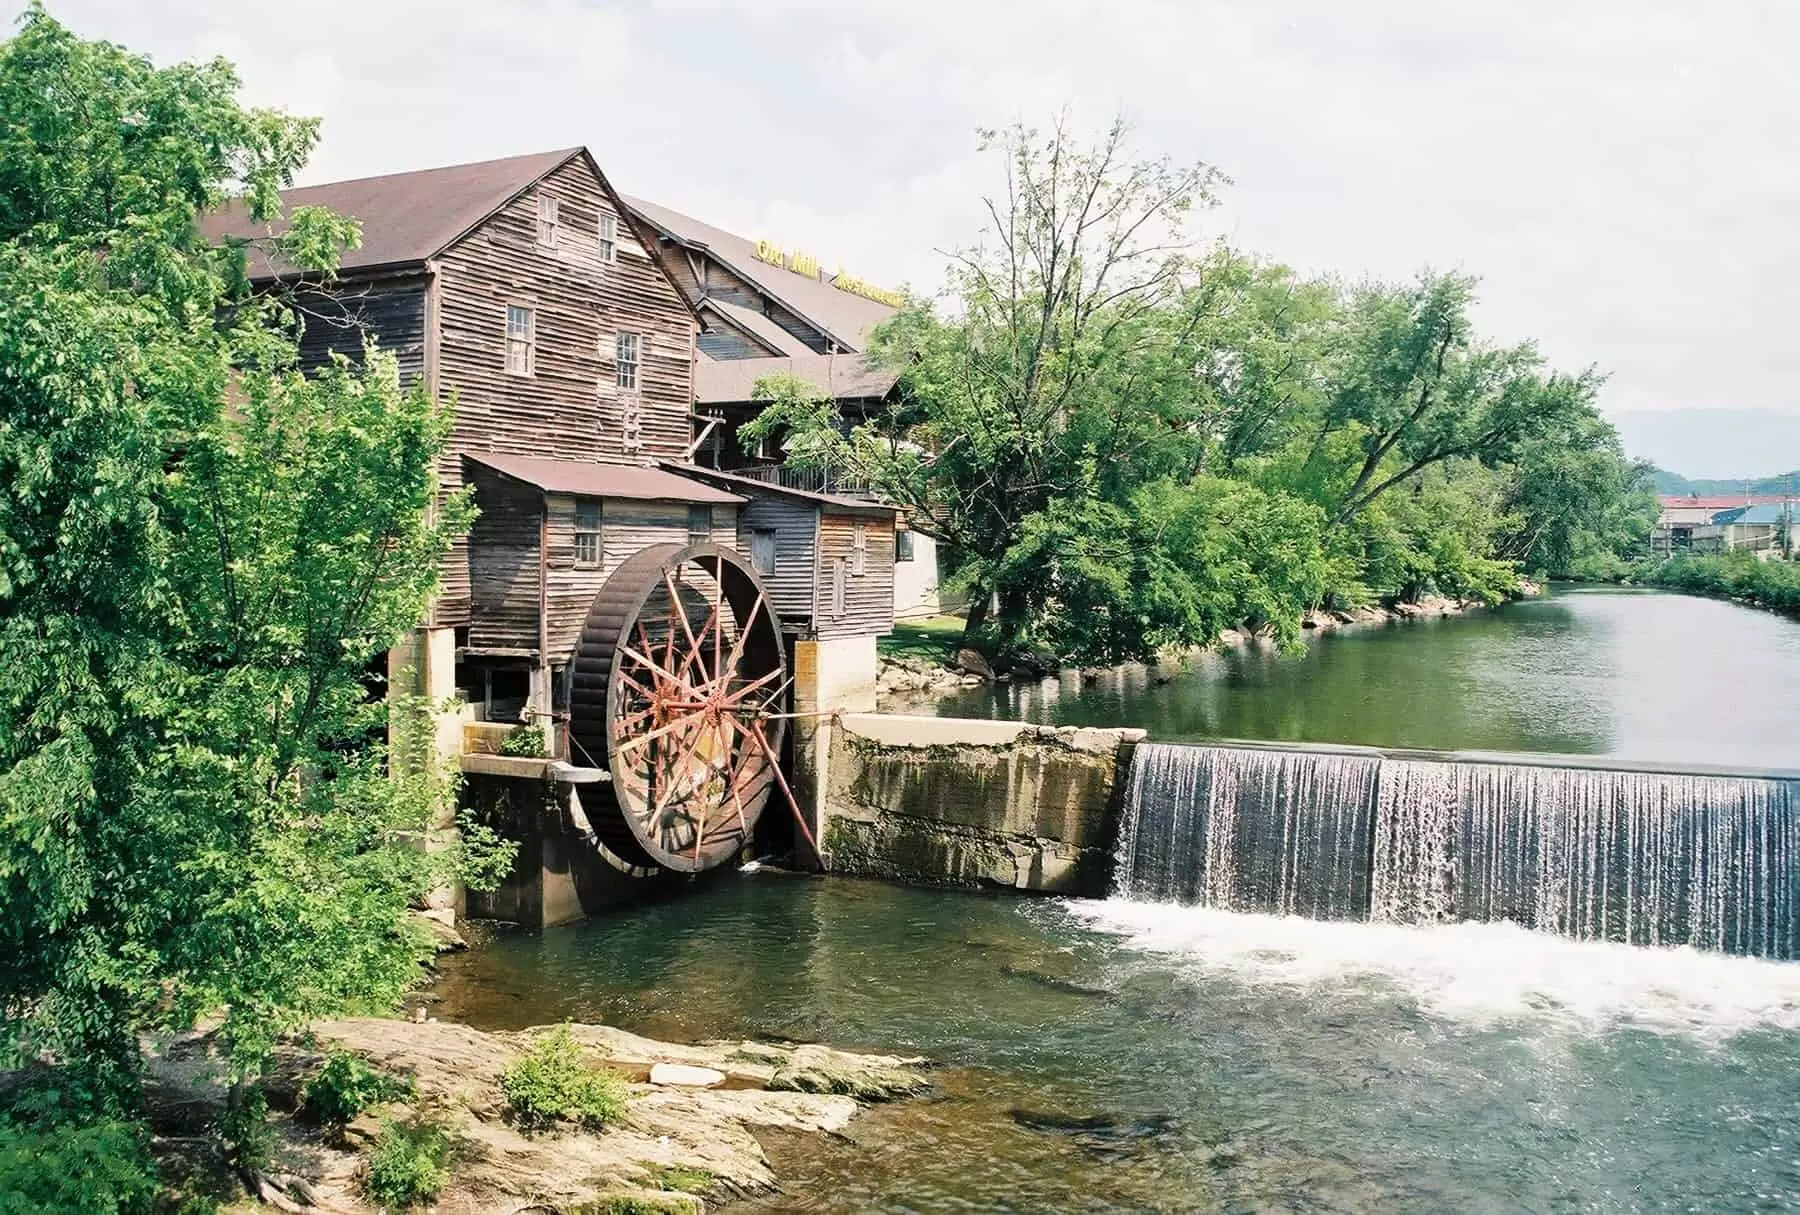 Pigeon River Pottery — The Old Mill